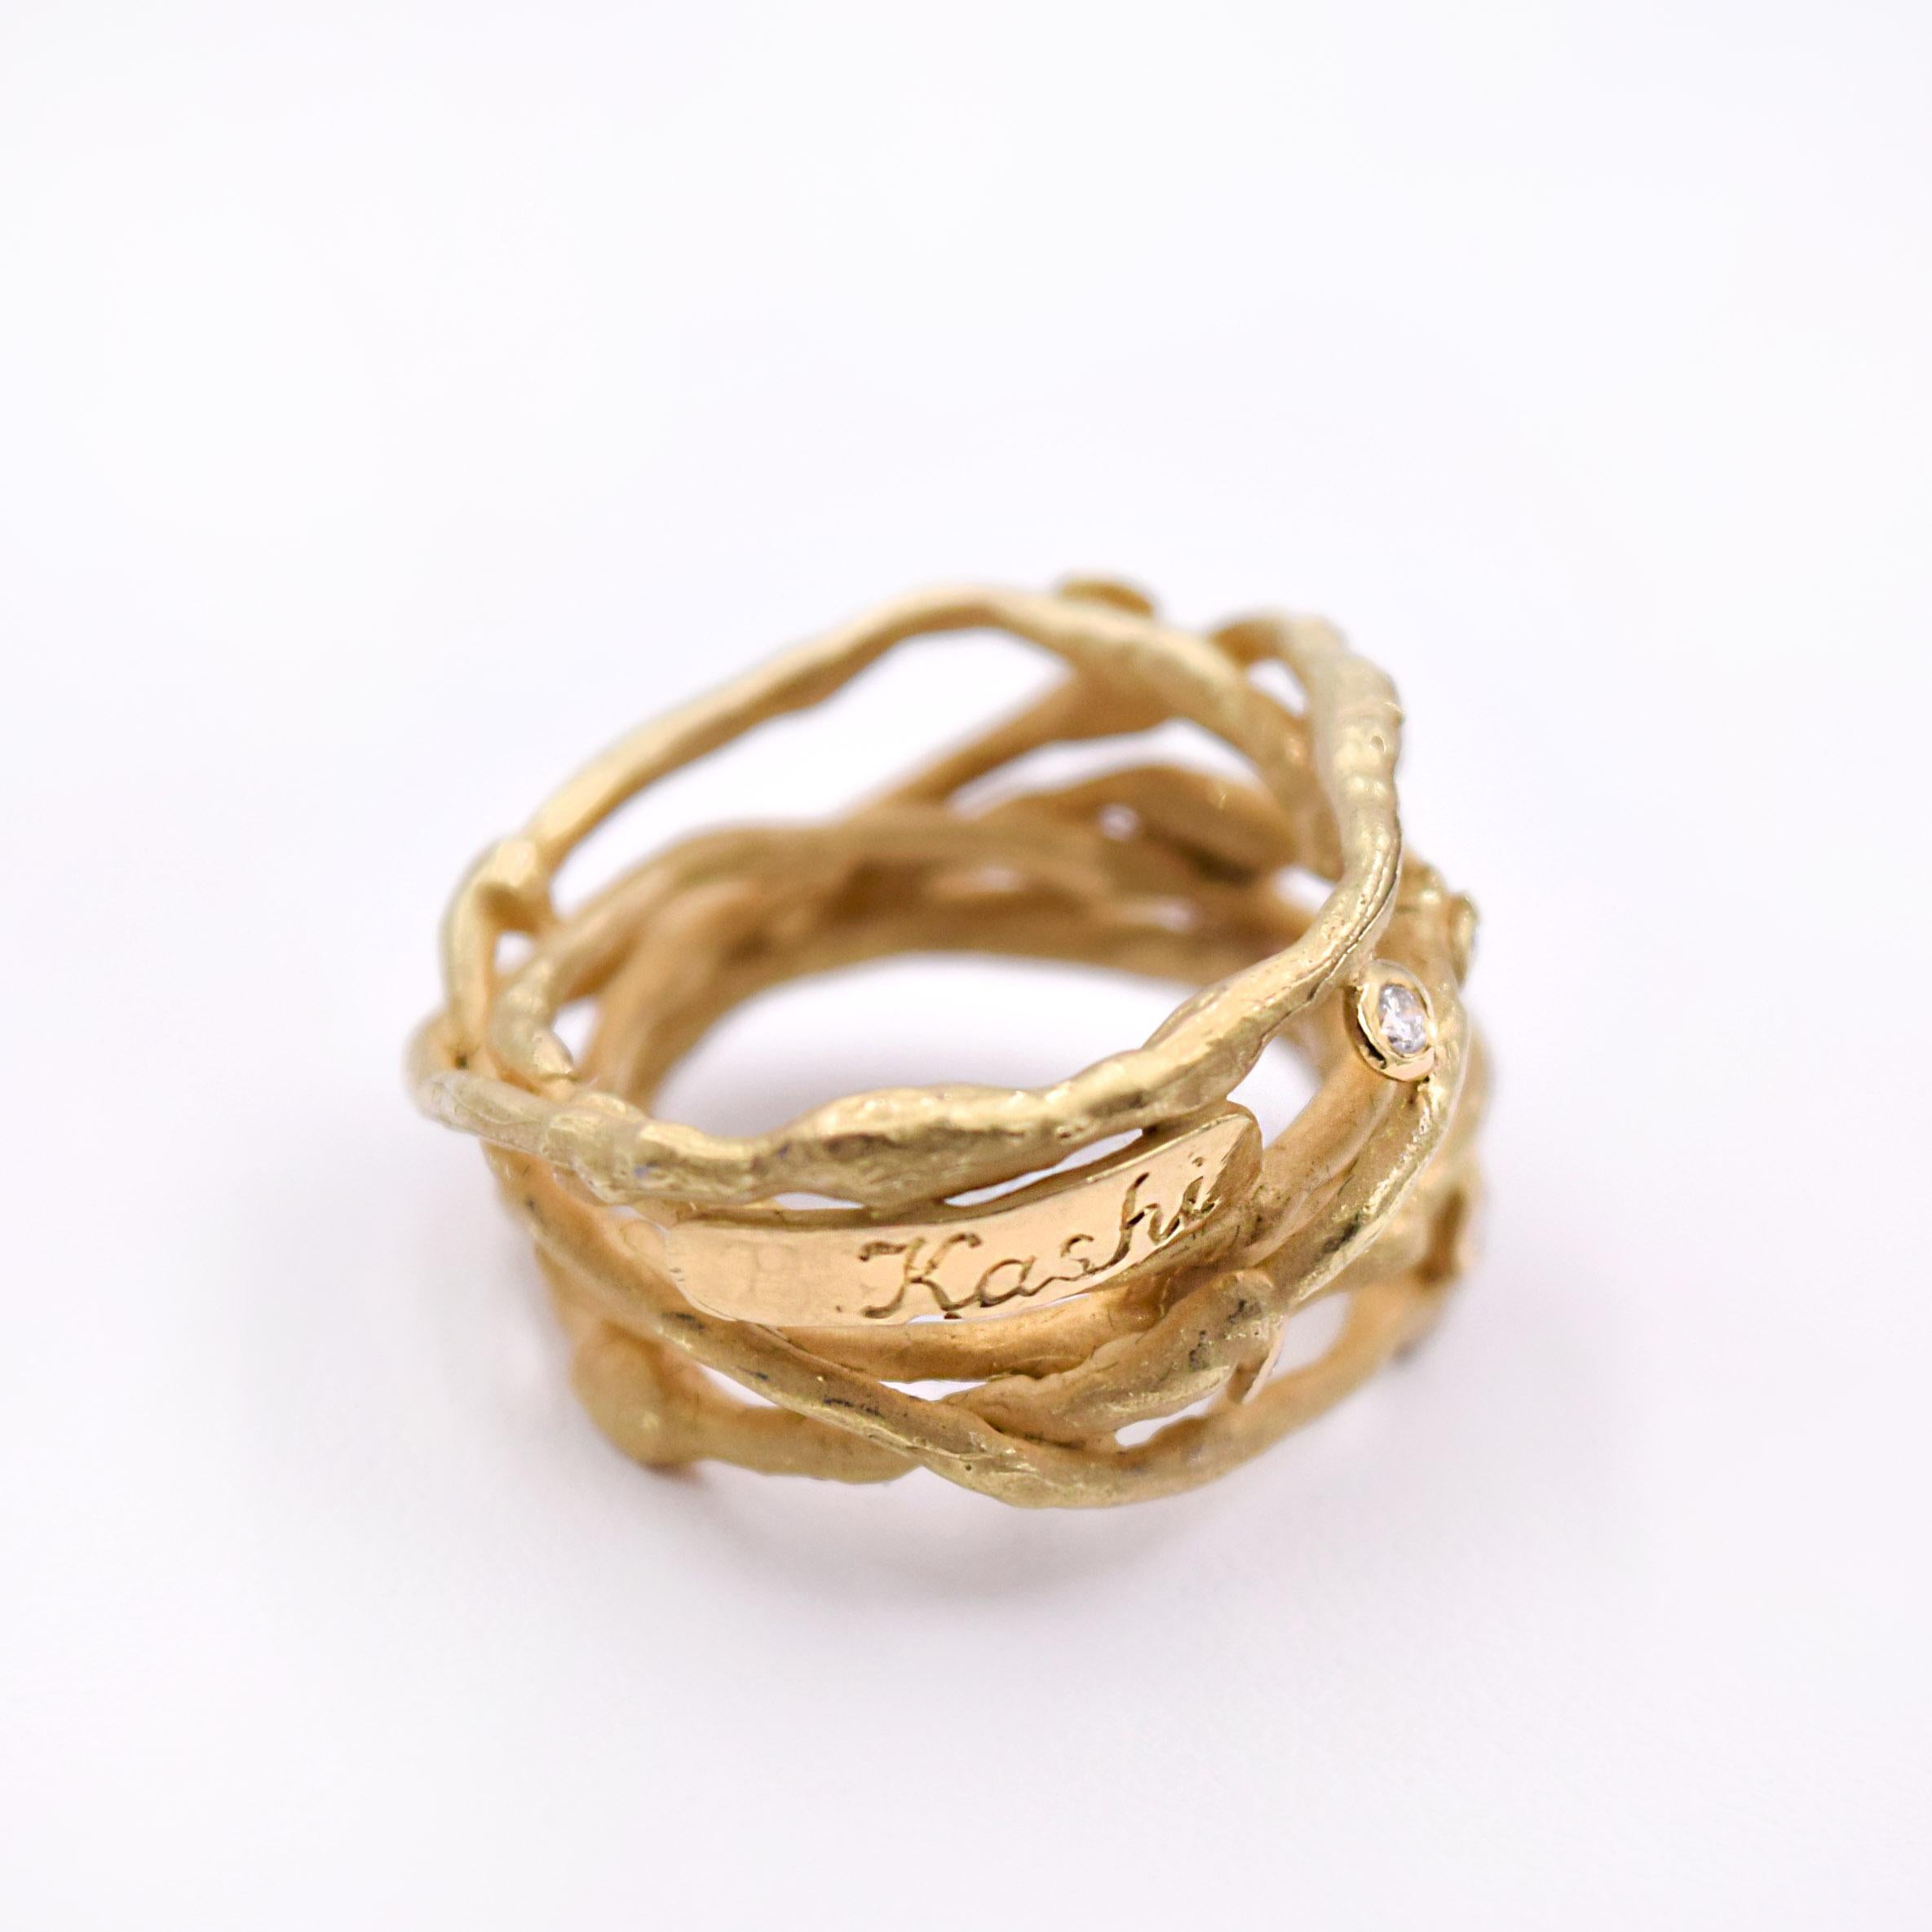 One of a kind gold wire ring with diamonds designed by Boaz Kashi in Tel Aviv. 
The total carat weight of the round, white diamonds is 0.22ct and the metal is 18K matte yellow gold.
Size of the ring is 7.